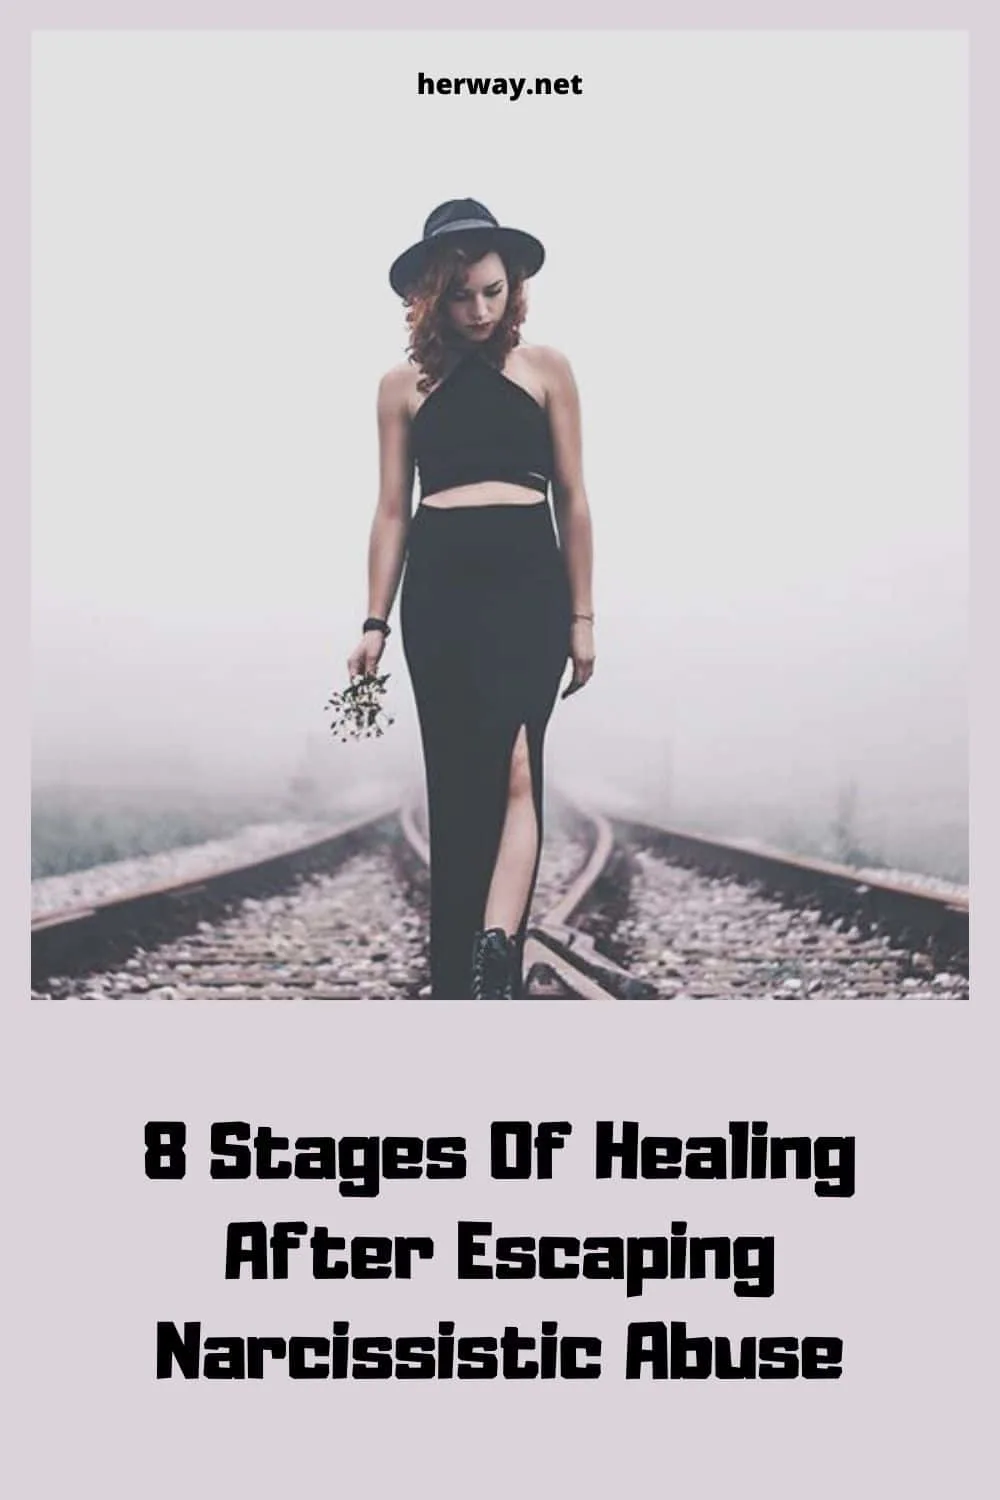 8 Stages Of Healing After Escaping Narcissistic Abuse